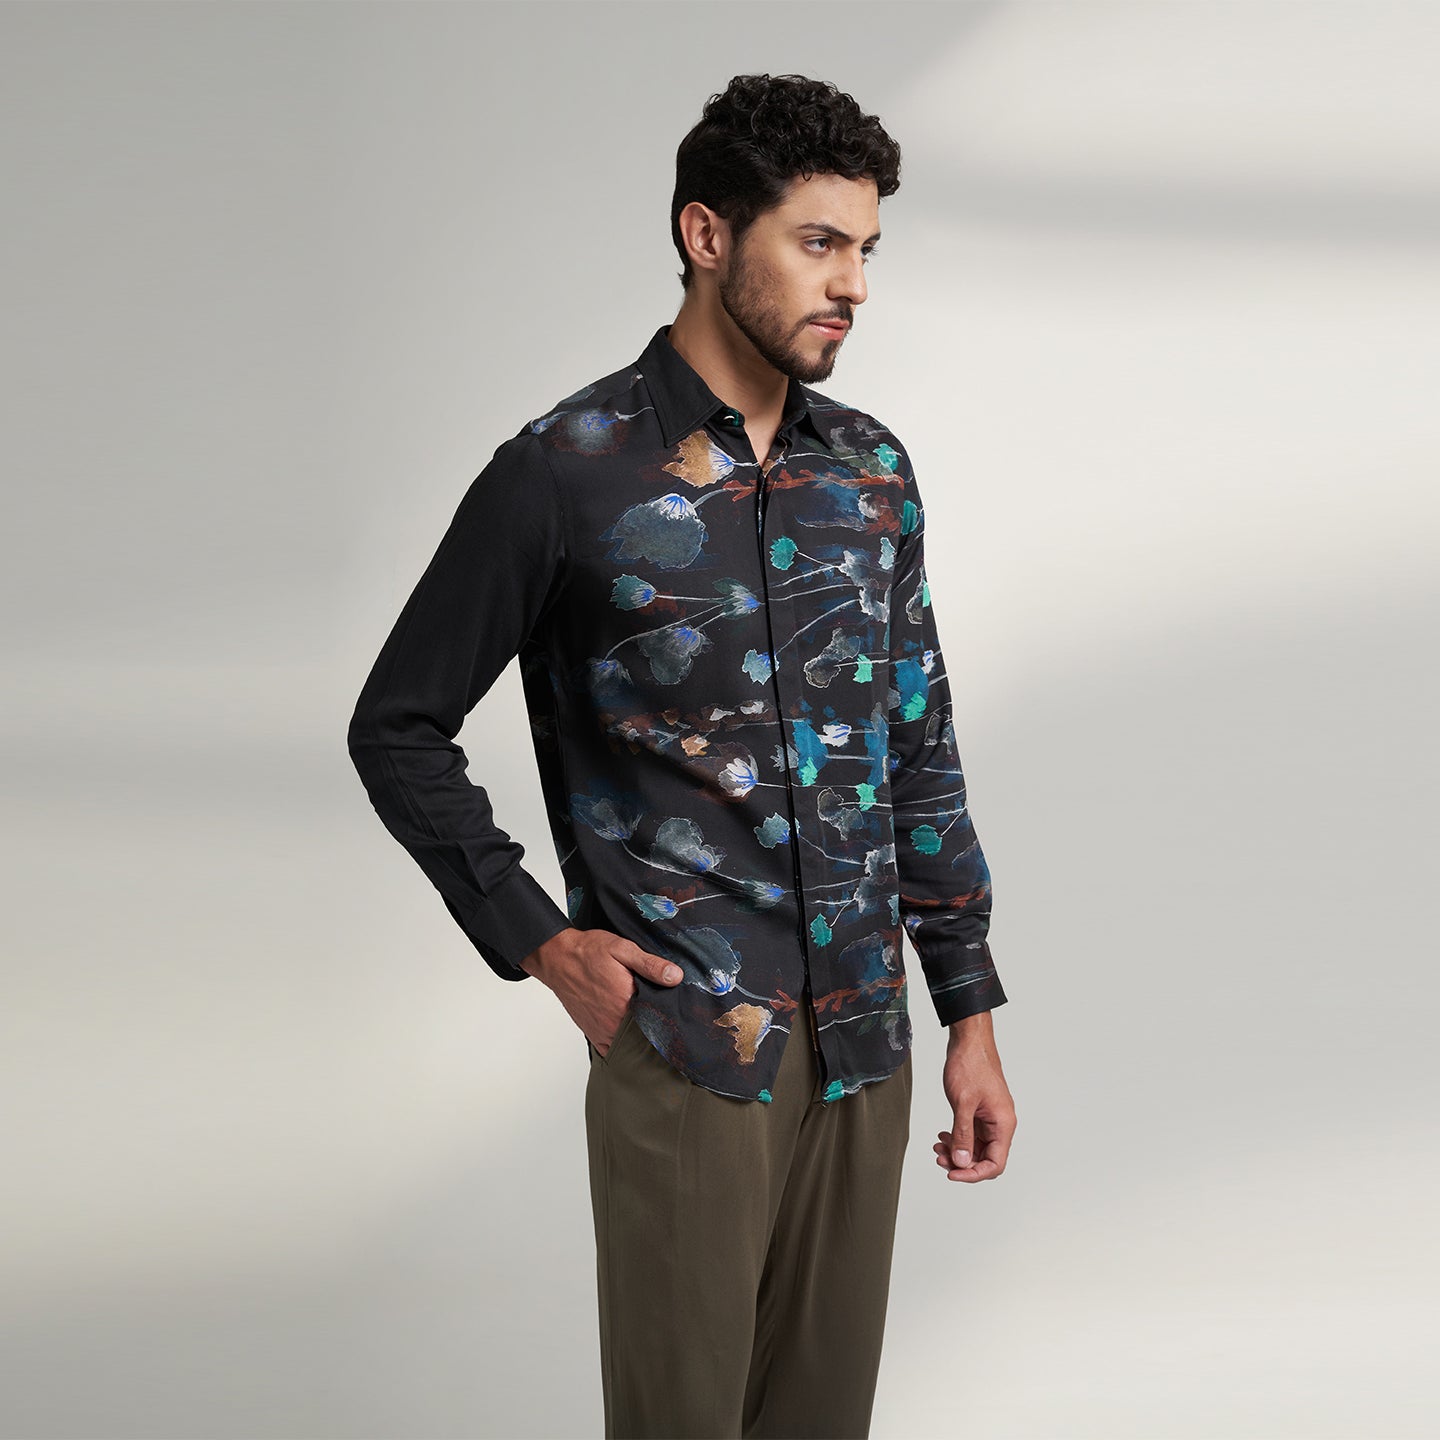 The printed Black floral organic lotus fabric shirt offers an interpretation of a timeless piece with a modern take. Made from a soft lotus stem silk fabric, It displays a comfortable fit and a rounded curved hemline featuring a placement floral pattern with one sleeve in solid and other sleeves in print, inspired by the  wilderness